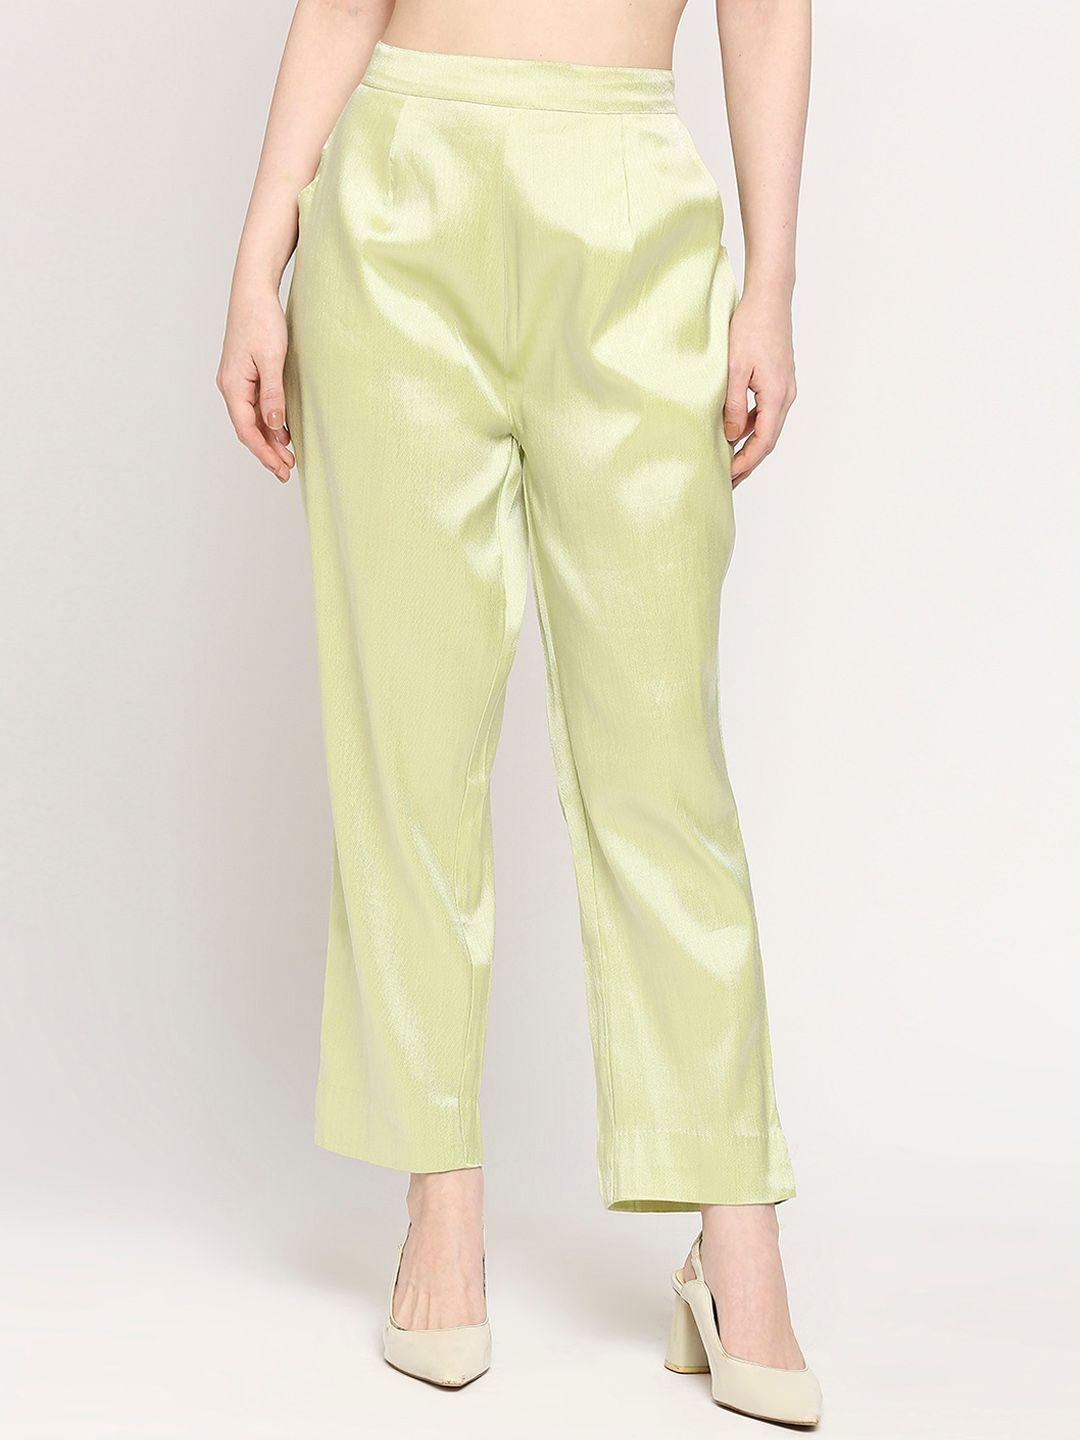 cloth haus india women relaxed sheen regular fit brocade trousers